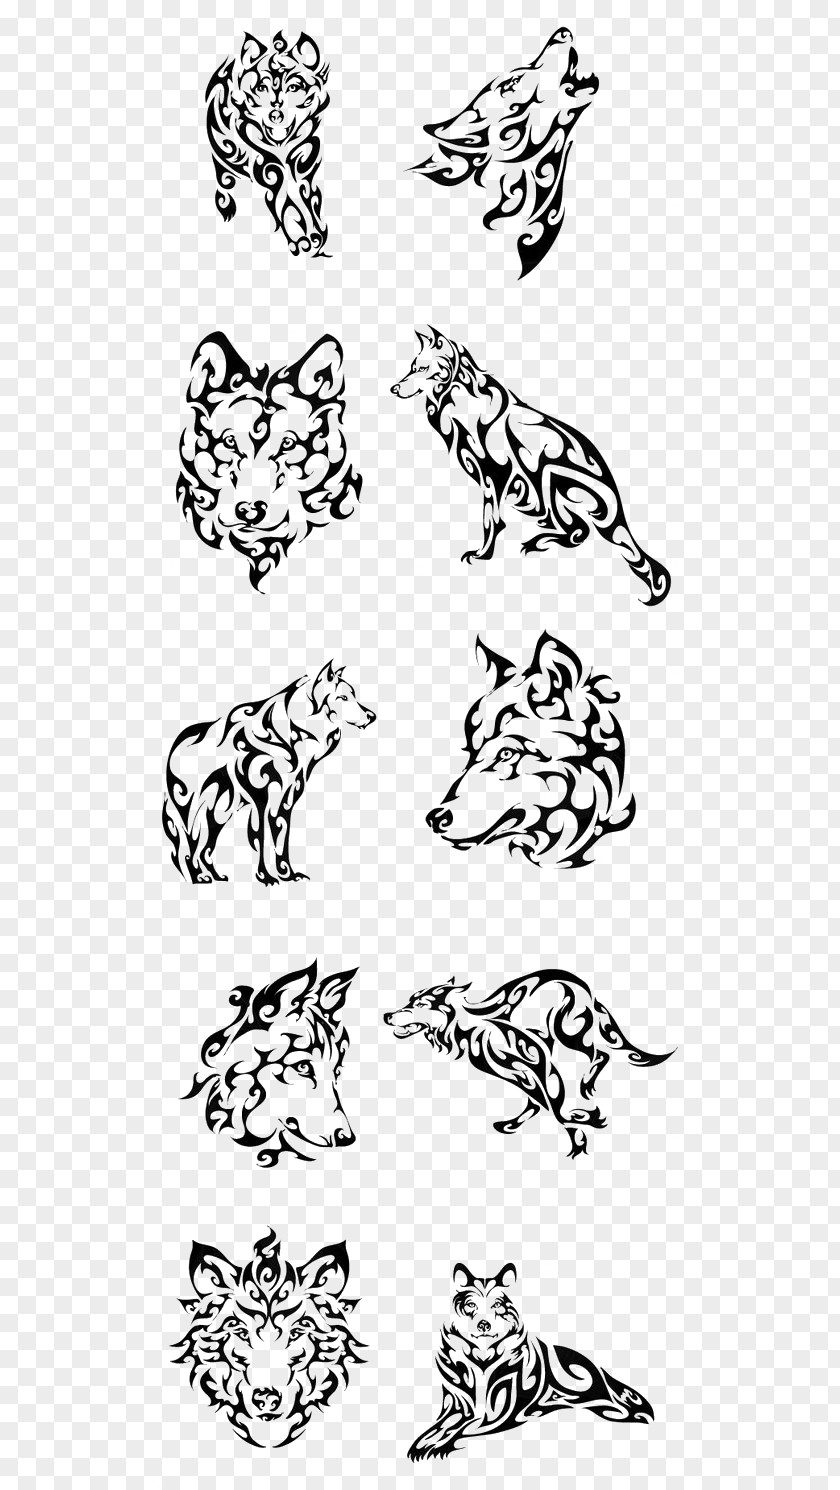 Cartoon Wolf Comanche Tattoo Tribe Symbol Native Americans In The United States PNG